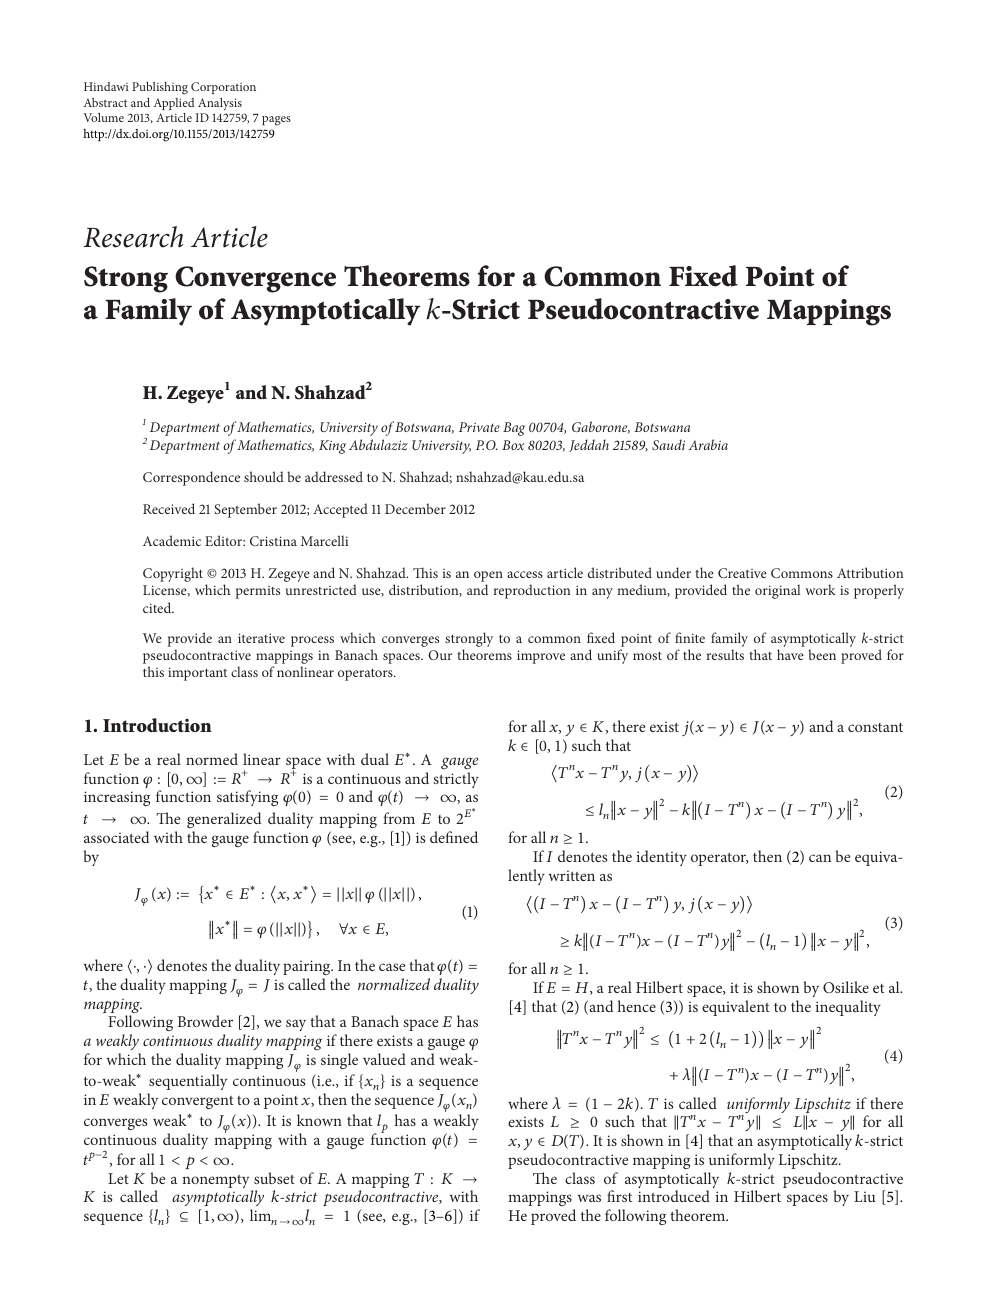 Strong Convergence Theorems For A Common Fixed Point Of A Family Of Asymptotically K Strict Pseudocontractive Mappings Topic Of Research Paper In Mathematics Download Scholarly Article Pdf And Read For Free